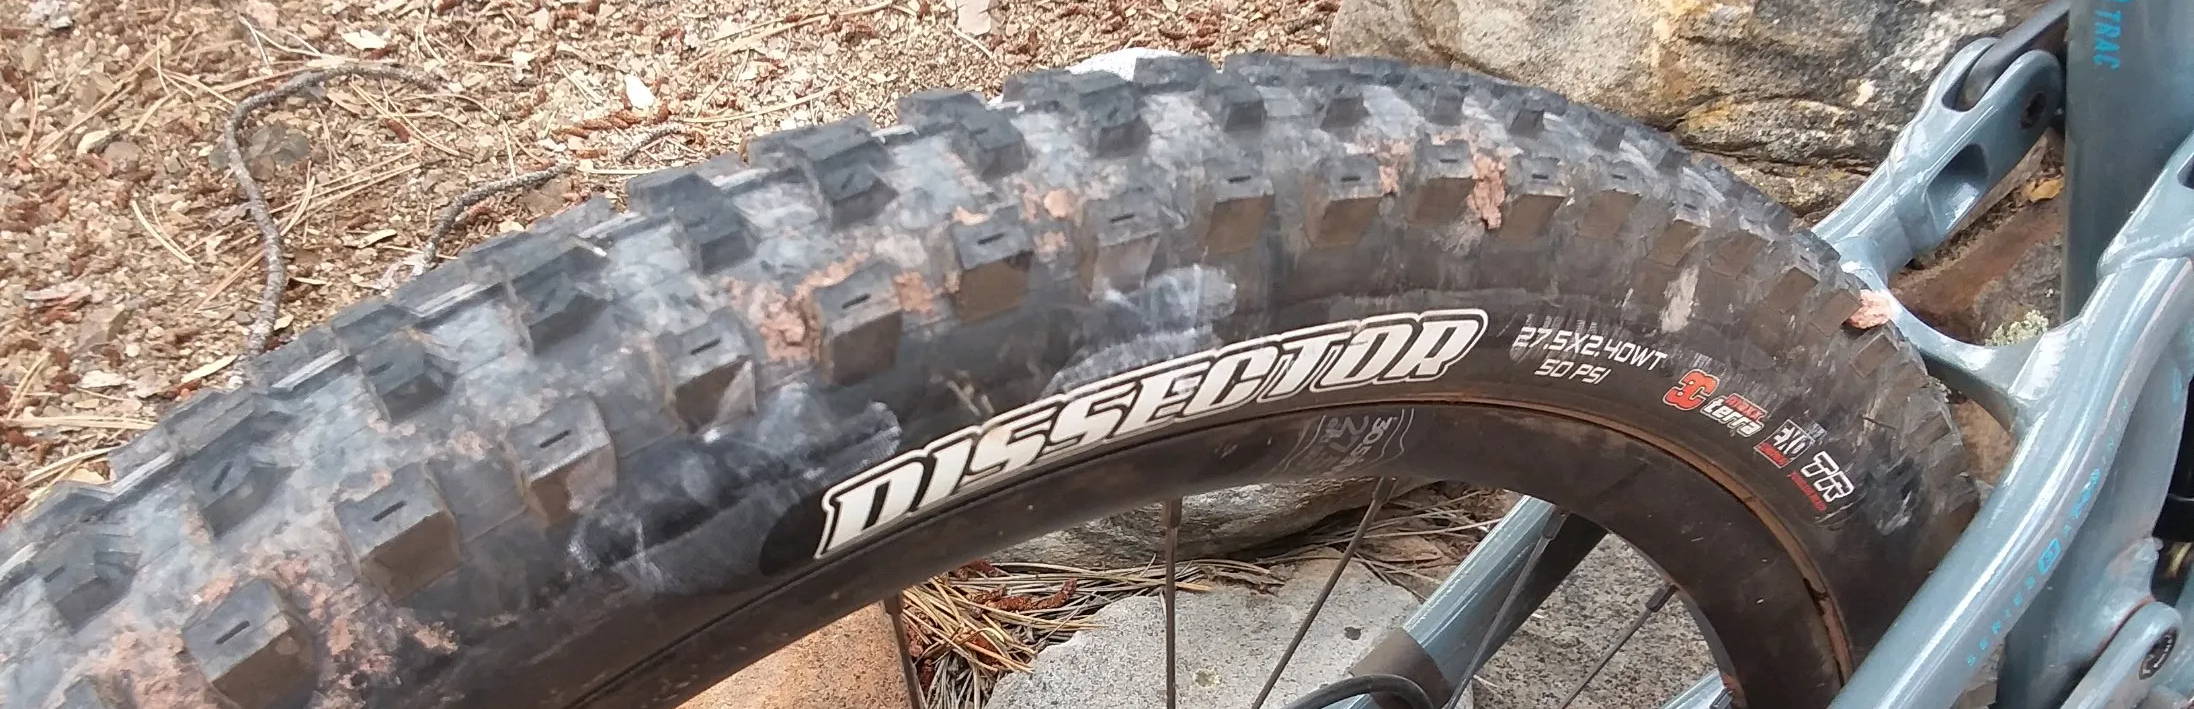 Maxxis dissector tire on a marin rifty 1 with 3c maxxterra and exo protection